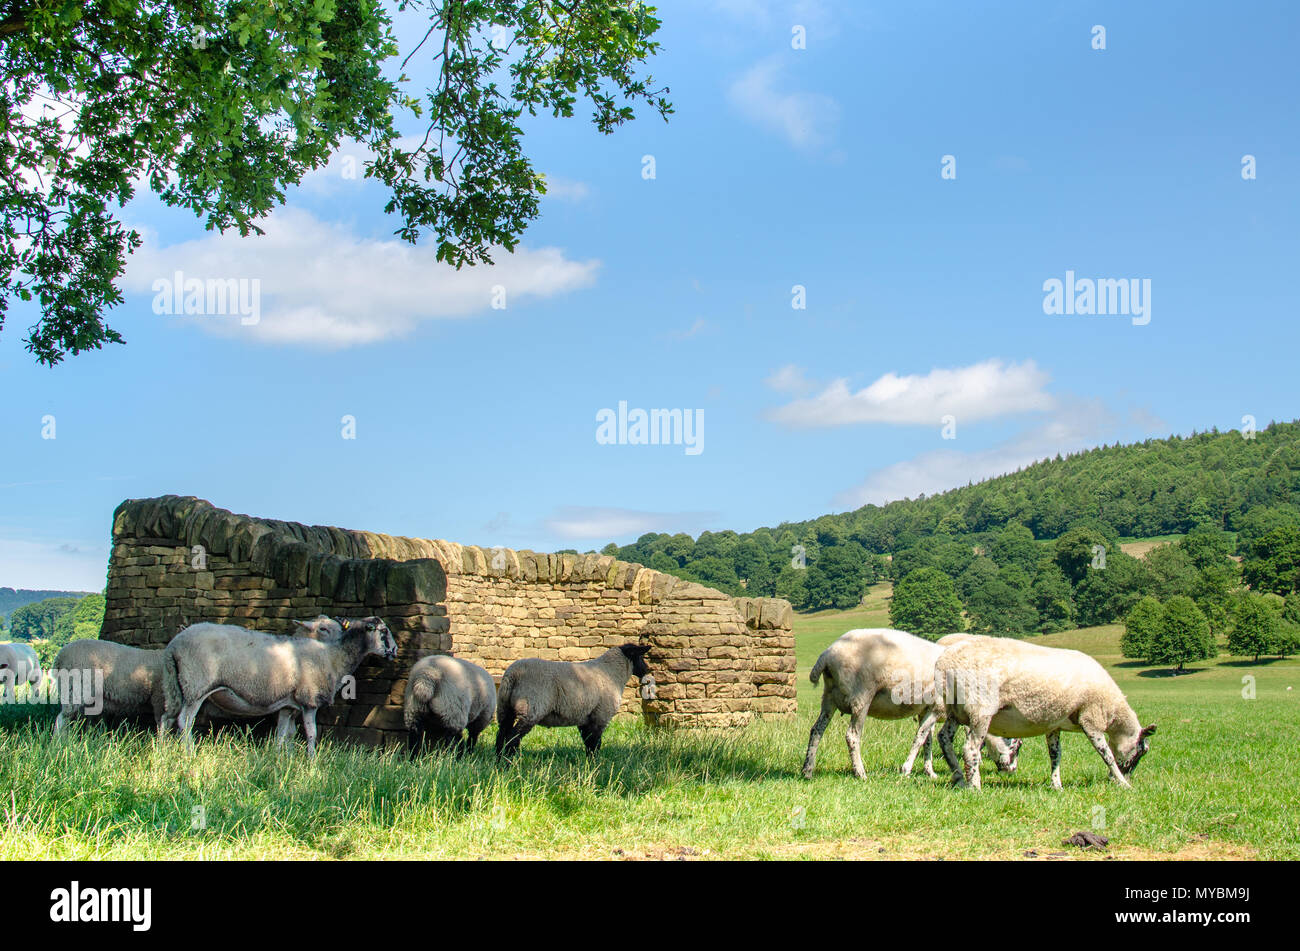 Sheep grazing in idyllic countryside landscape in the Derbyshire Dales, England Stock Photo